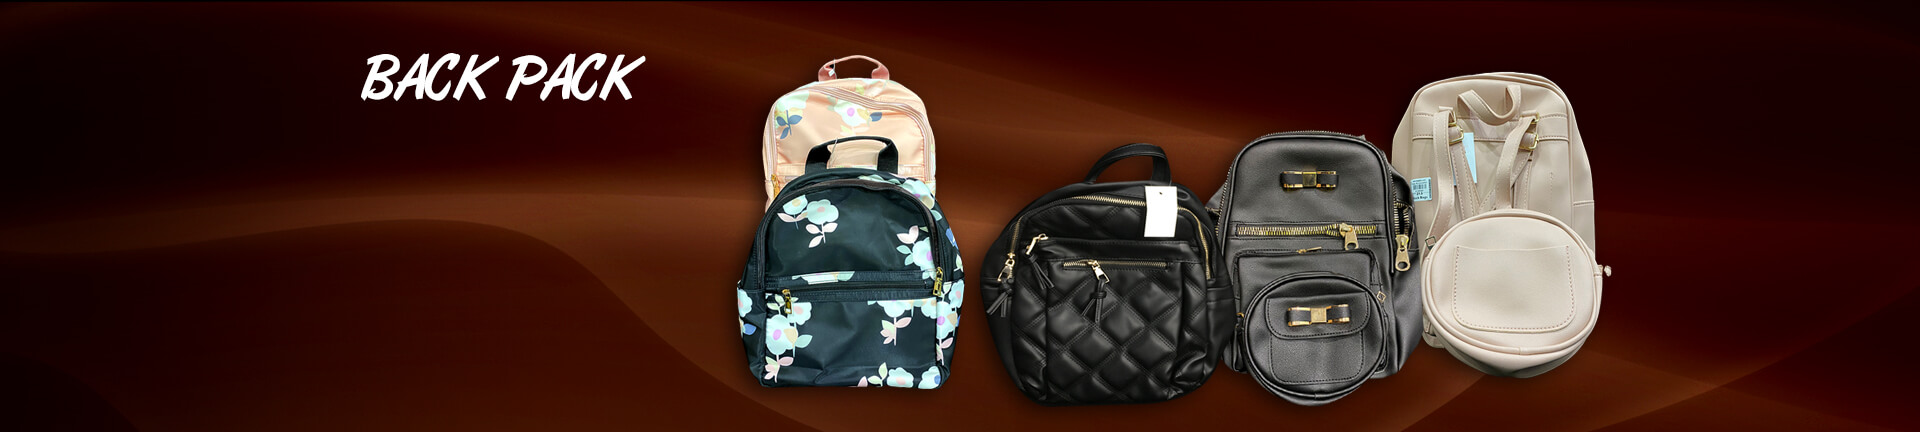 Best Backpack for Girls & Women Prices in Pakistan at Kayazar.com